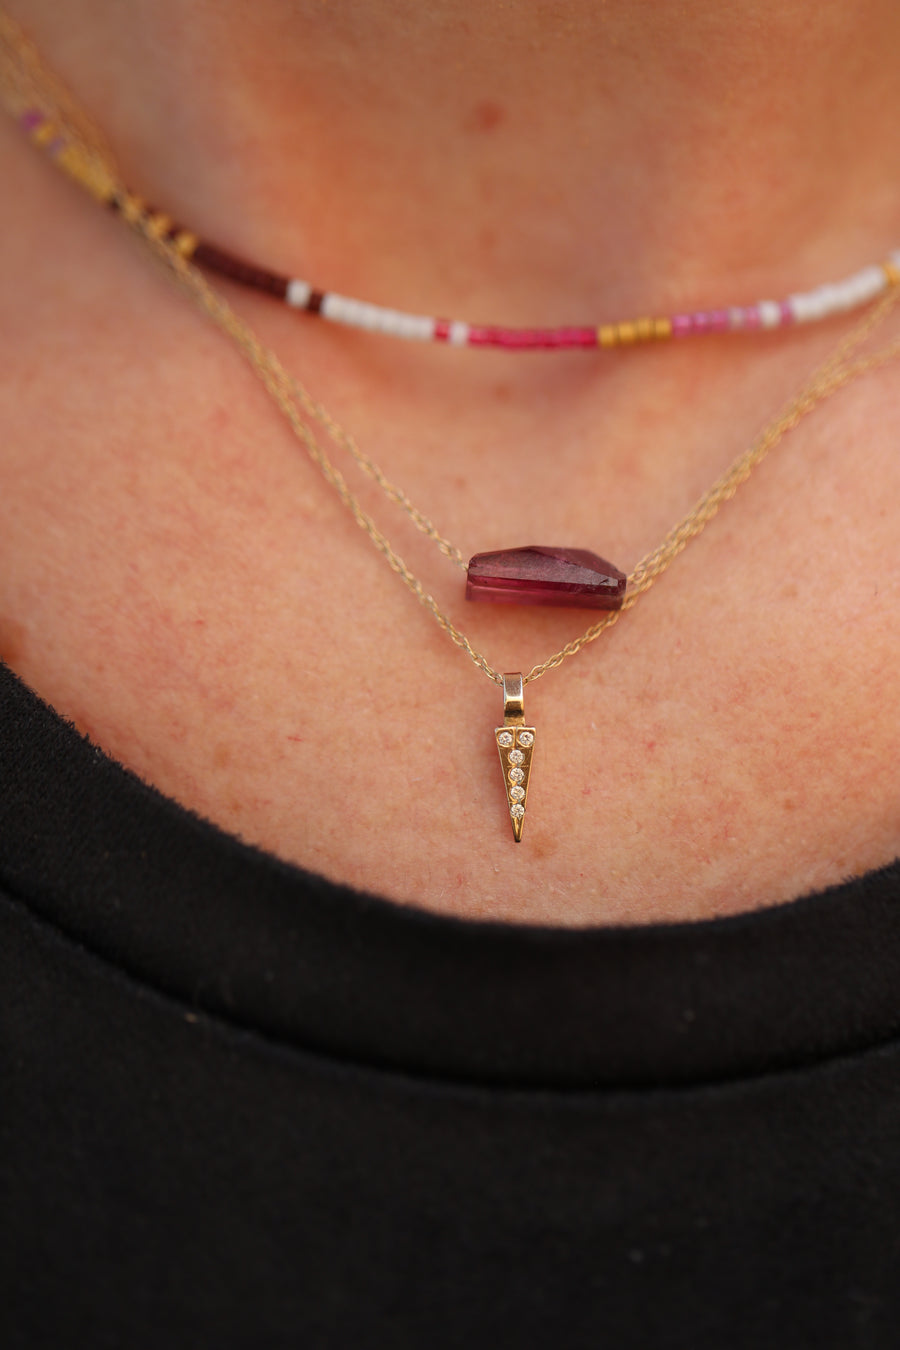 Japanese Microbead Necklaces - 14k Gold Chain